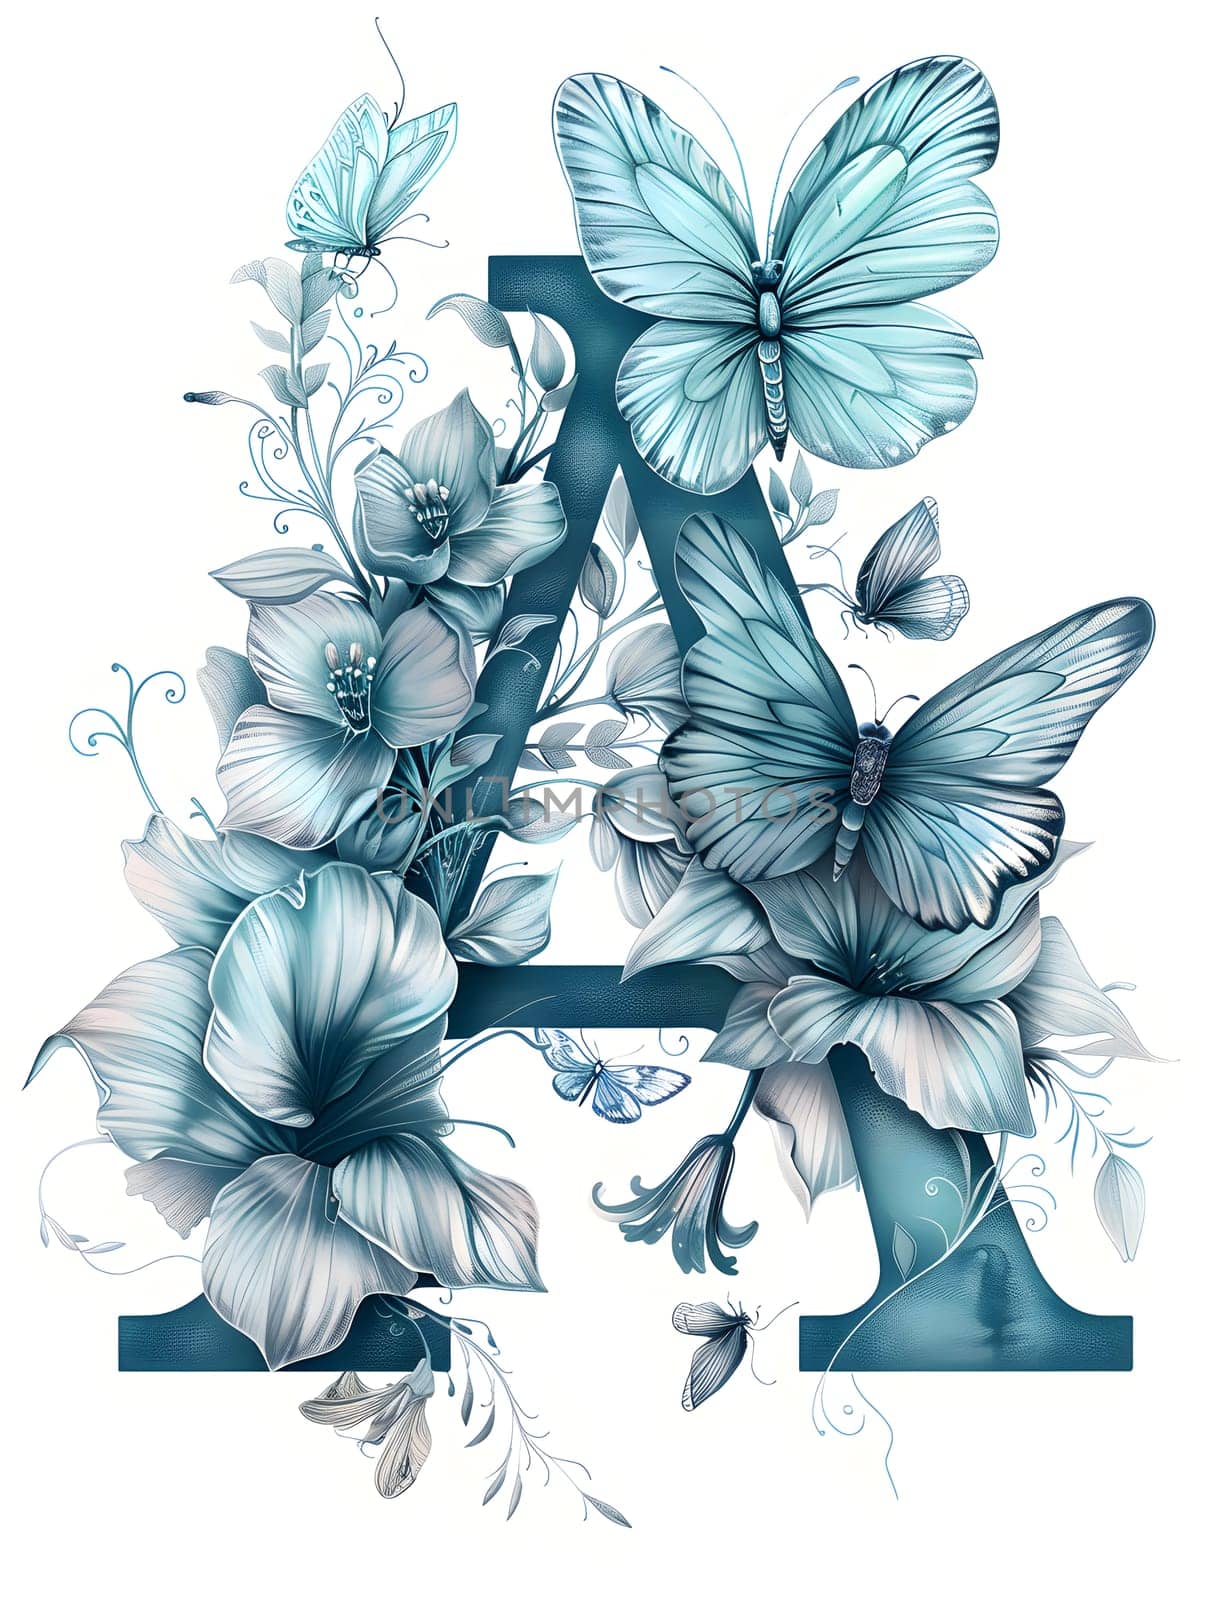 The letter a is adorned with a beautiful design of blue flowers and butterflies, showcasing the artistry of plantinspired patterns and creativity in textile decoration